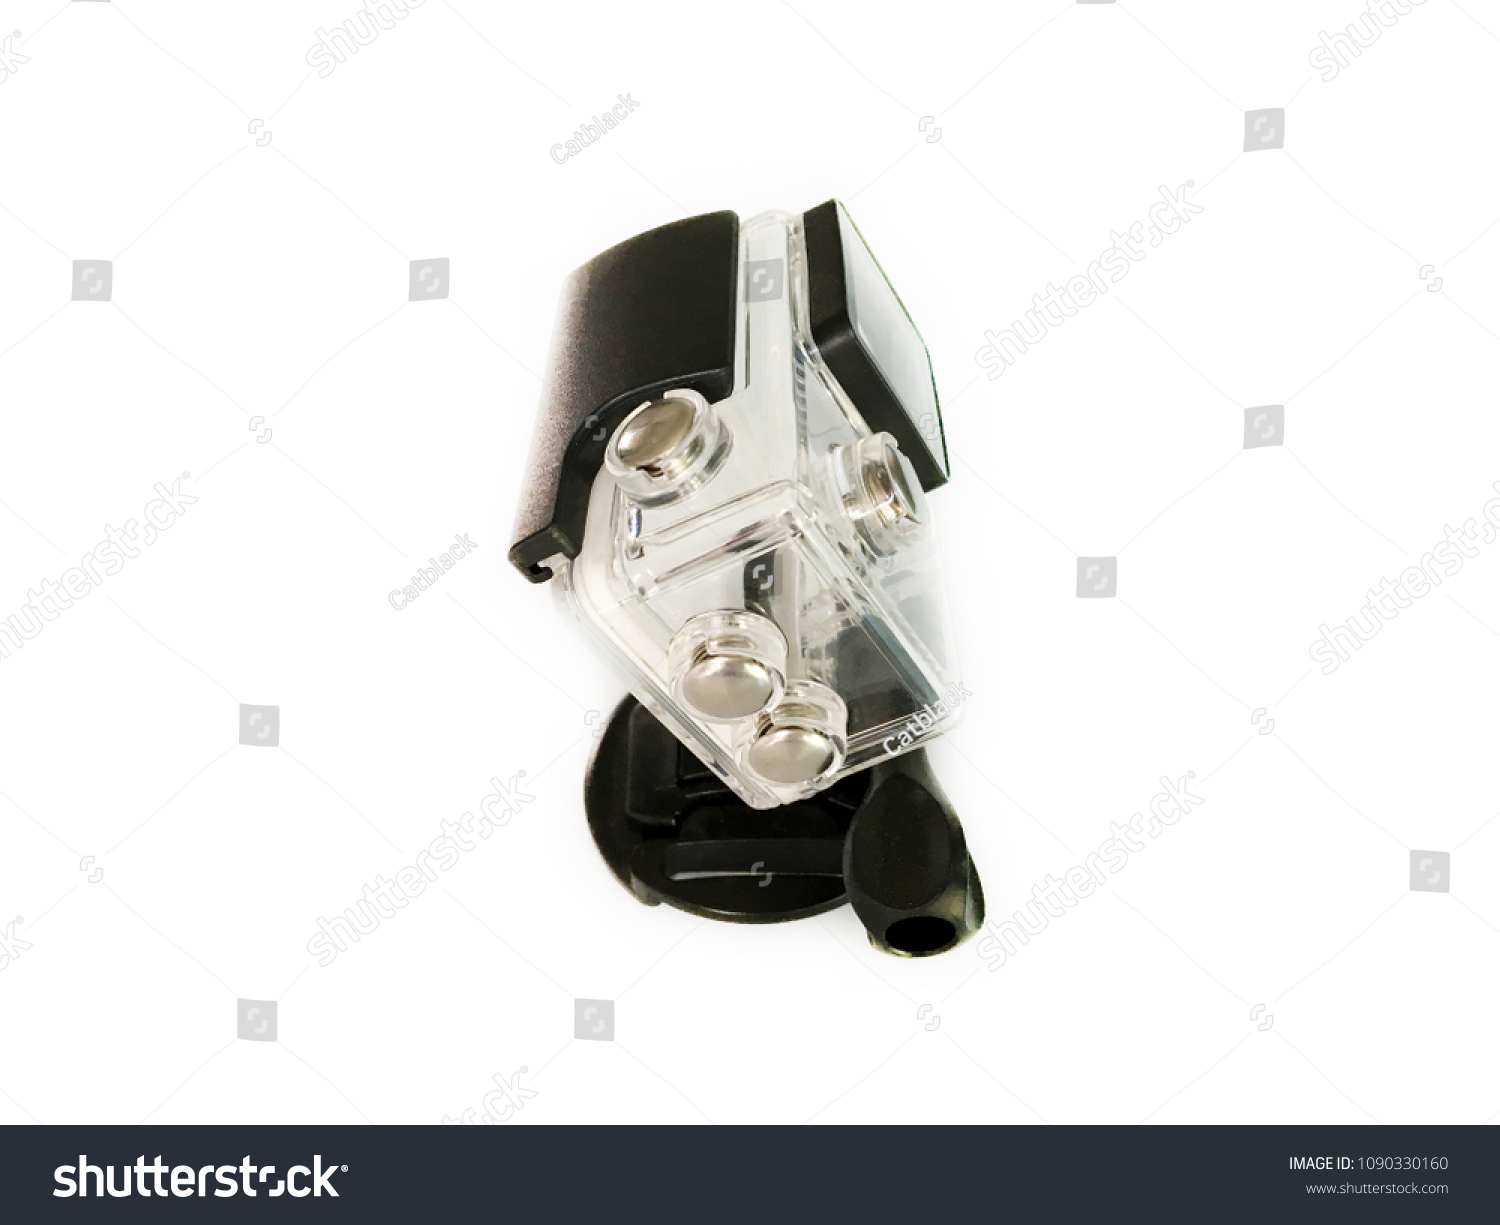 Right Camera Cover On White Background Stock Photo Edit Now 1090330160